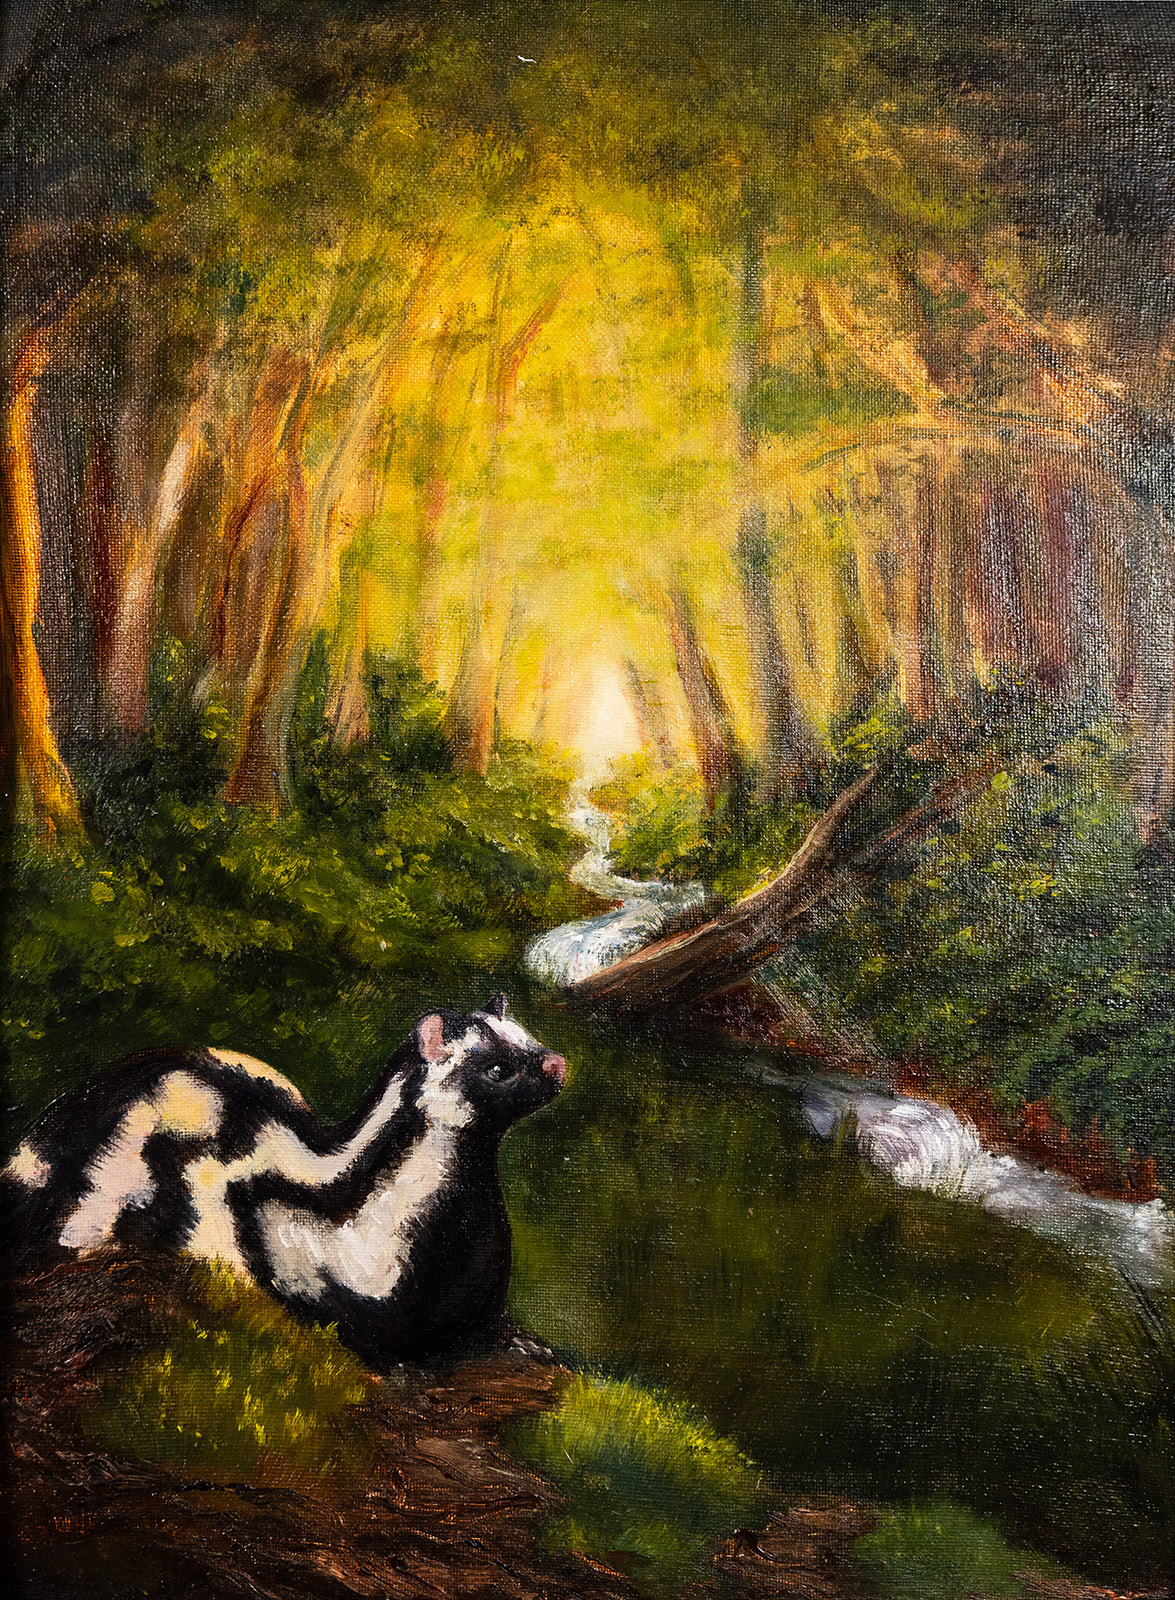 A painting of a spotted skunk by a stream, with the sun streaming through the trees in the background.